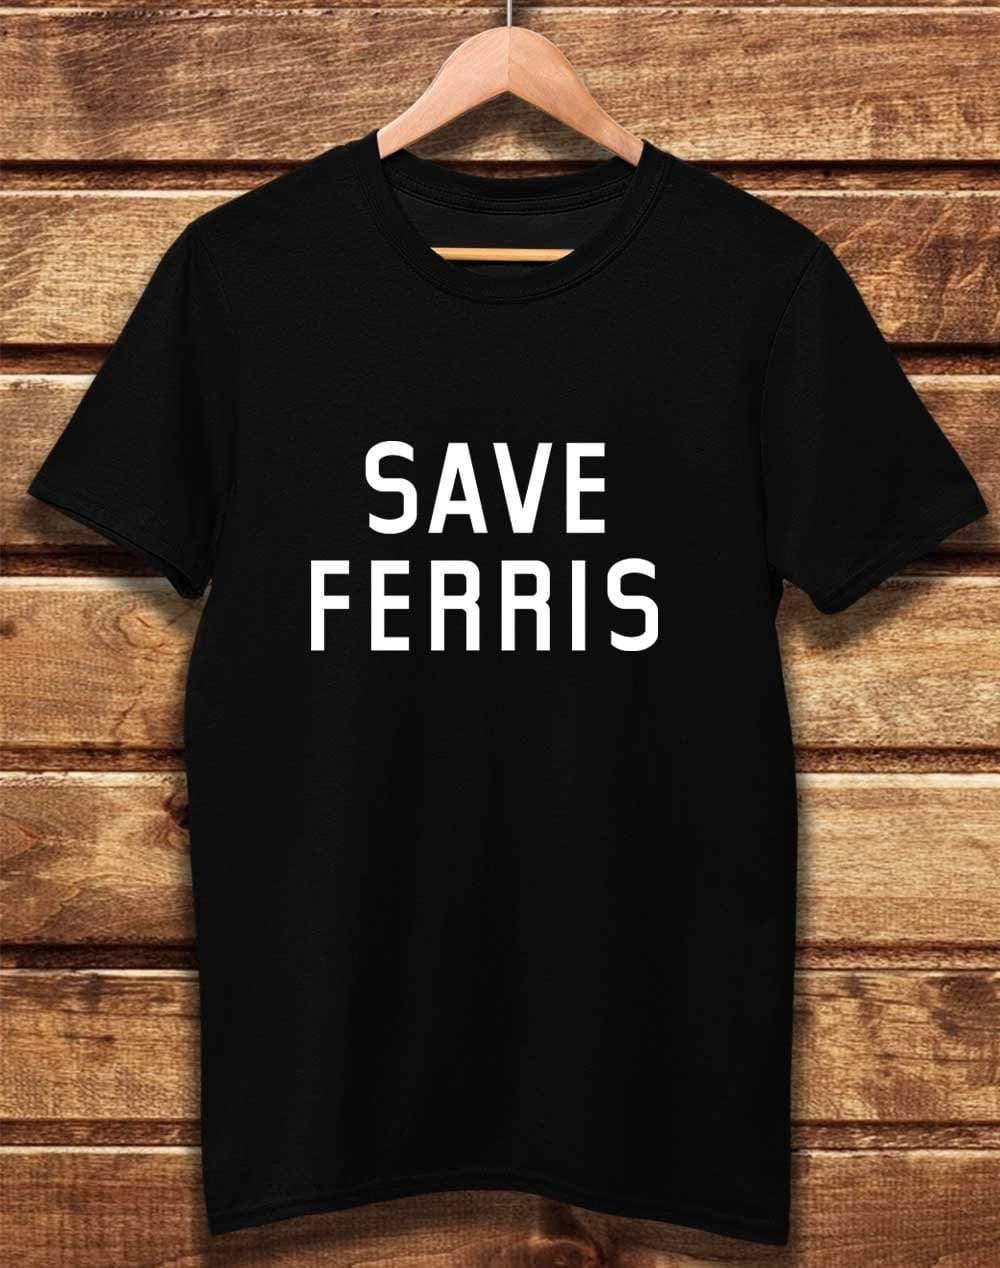 DELUXE Save Ferris Organic Cotton T-Shirt XS / Black  - Off World Tees